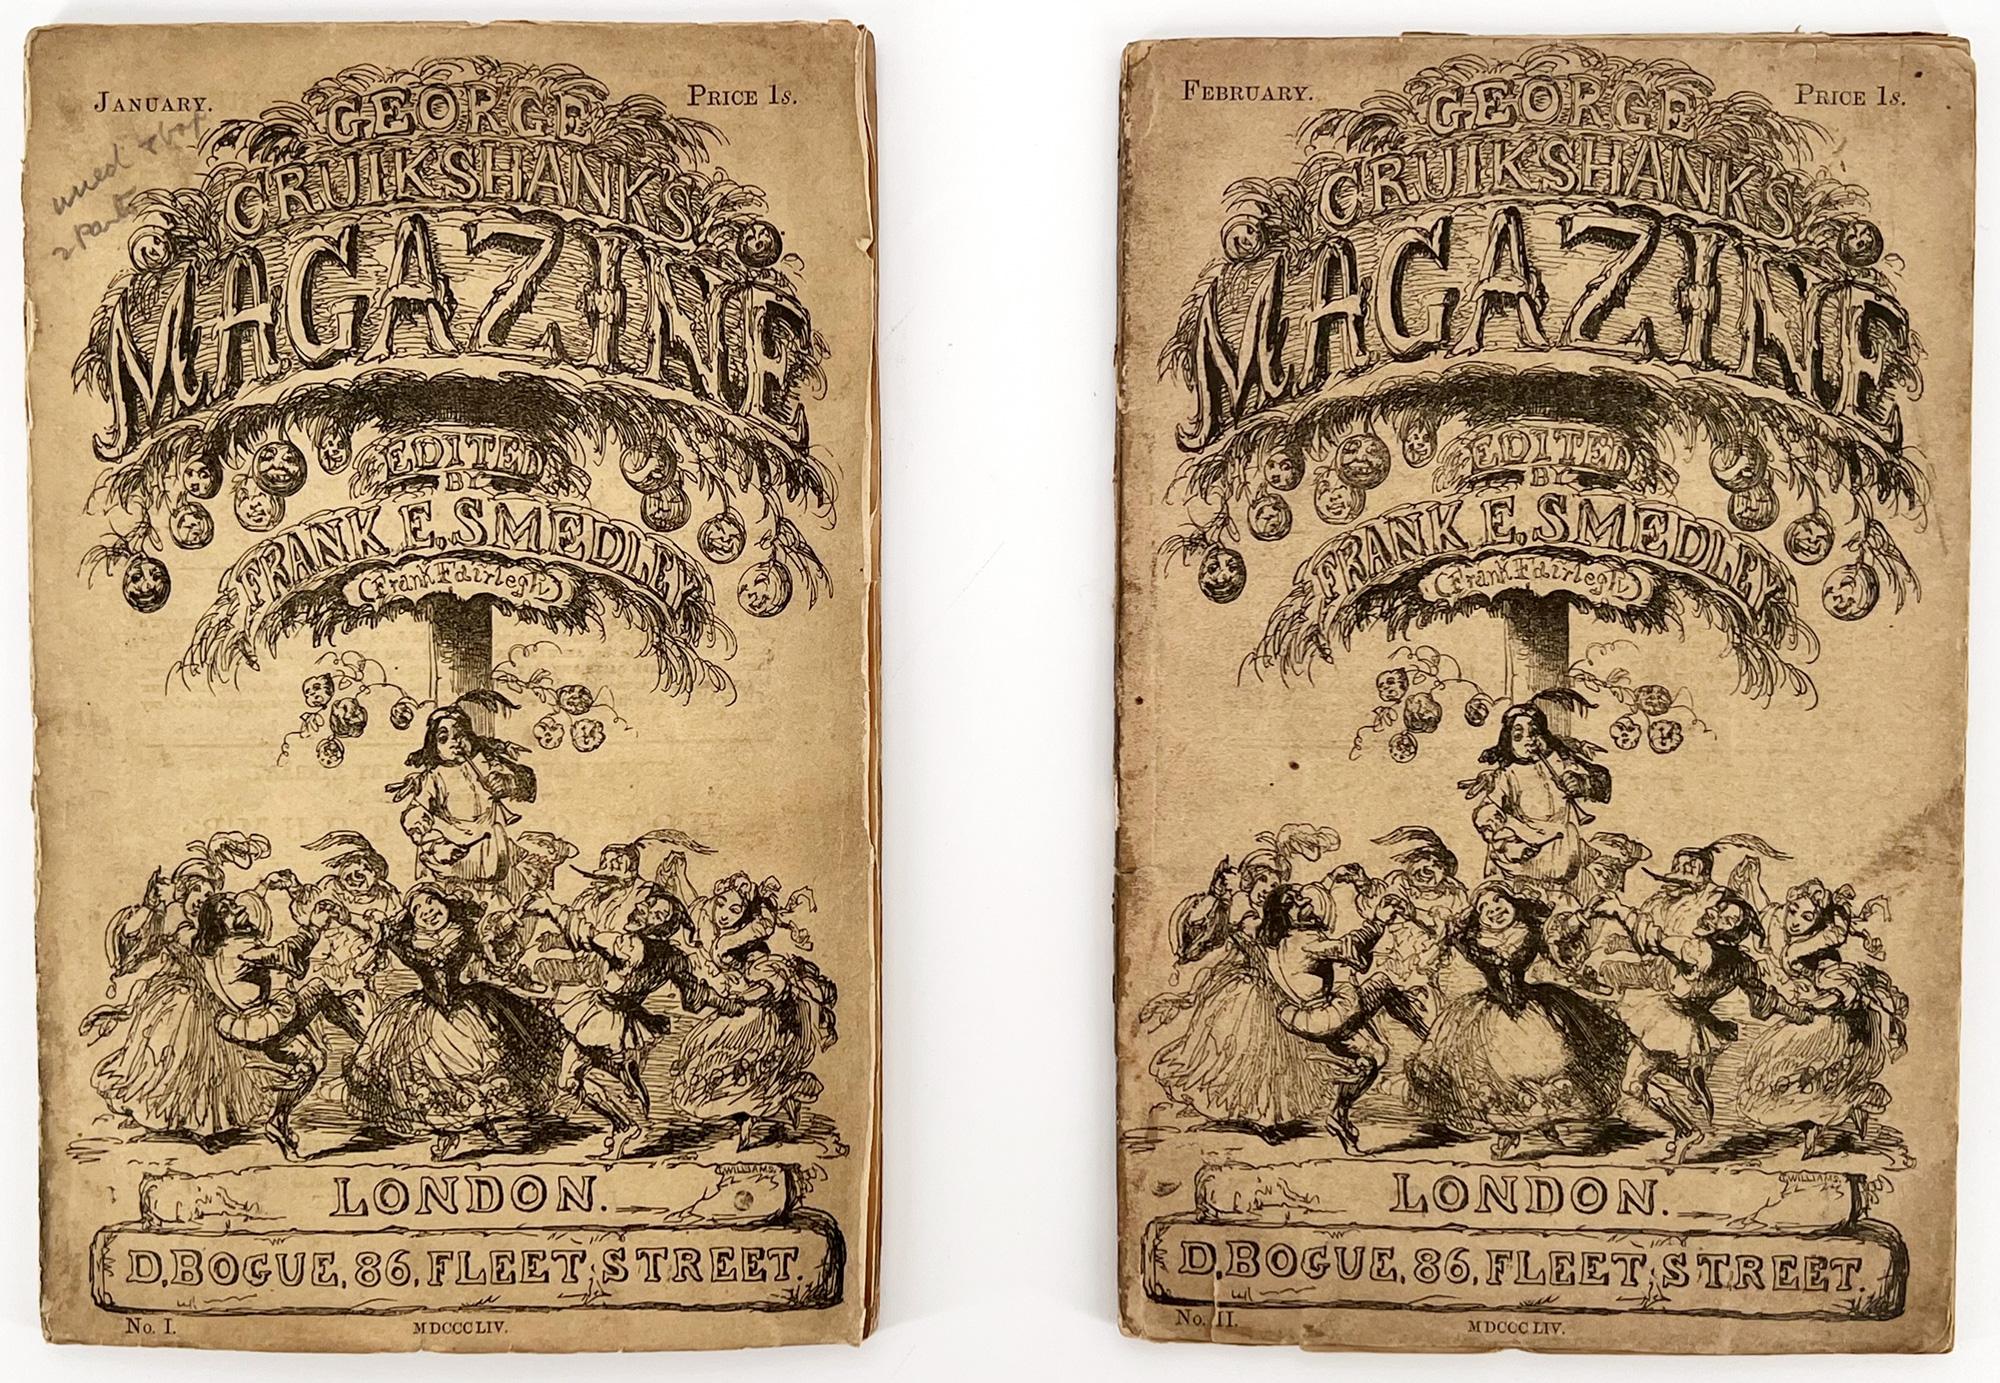 VERY RARE, complete run (2 issues) of the illustrated George Cruikshank's Magazine, with all four folding plates by Cruikshank. In a handsome custom case.

London: D. Bogue, 1854. 
8vo, 2 magazines, each 8 3/4 x 5 5/8 (223 x 145 mm), January 1854